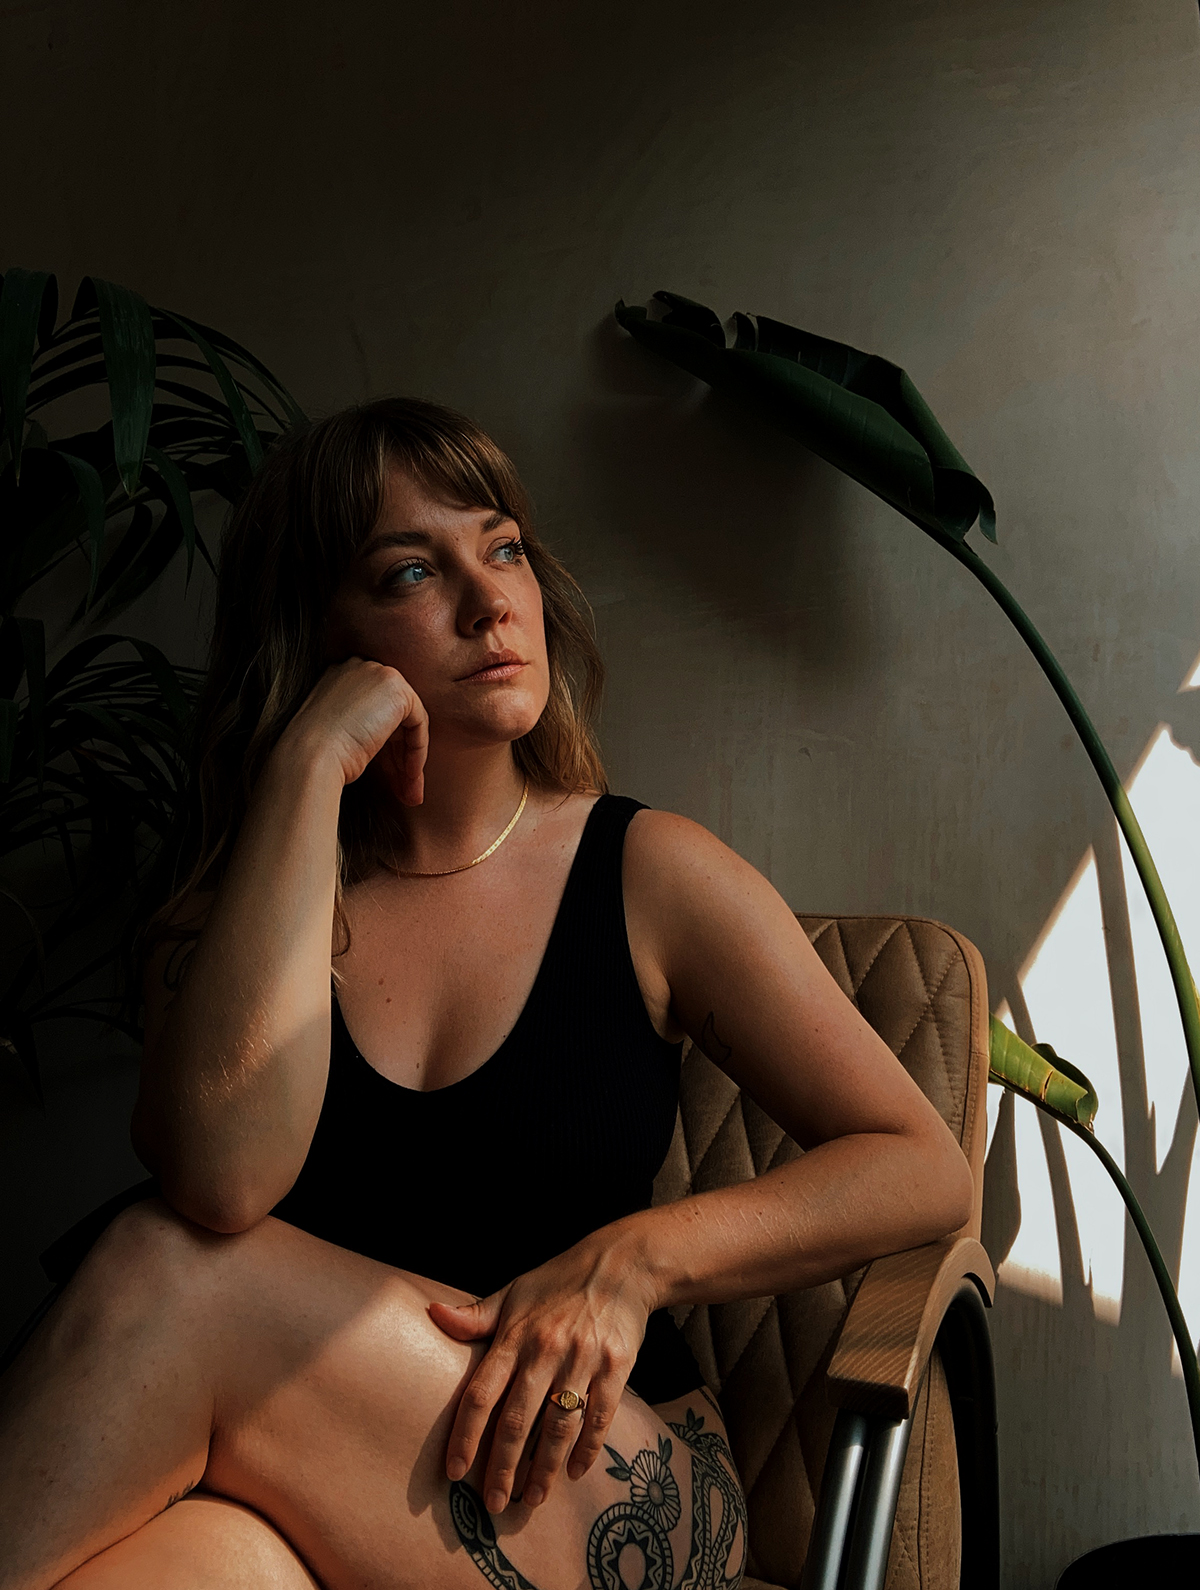 Lyzi sitting on a vintage chair in front of a plaster wall and large plants. Wearing simple black underwear and a Daisy x Estee Lalonde snake chain and forget me not signet ring.